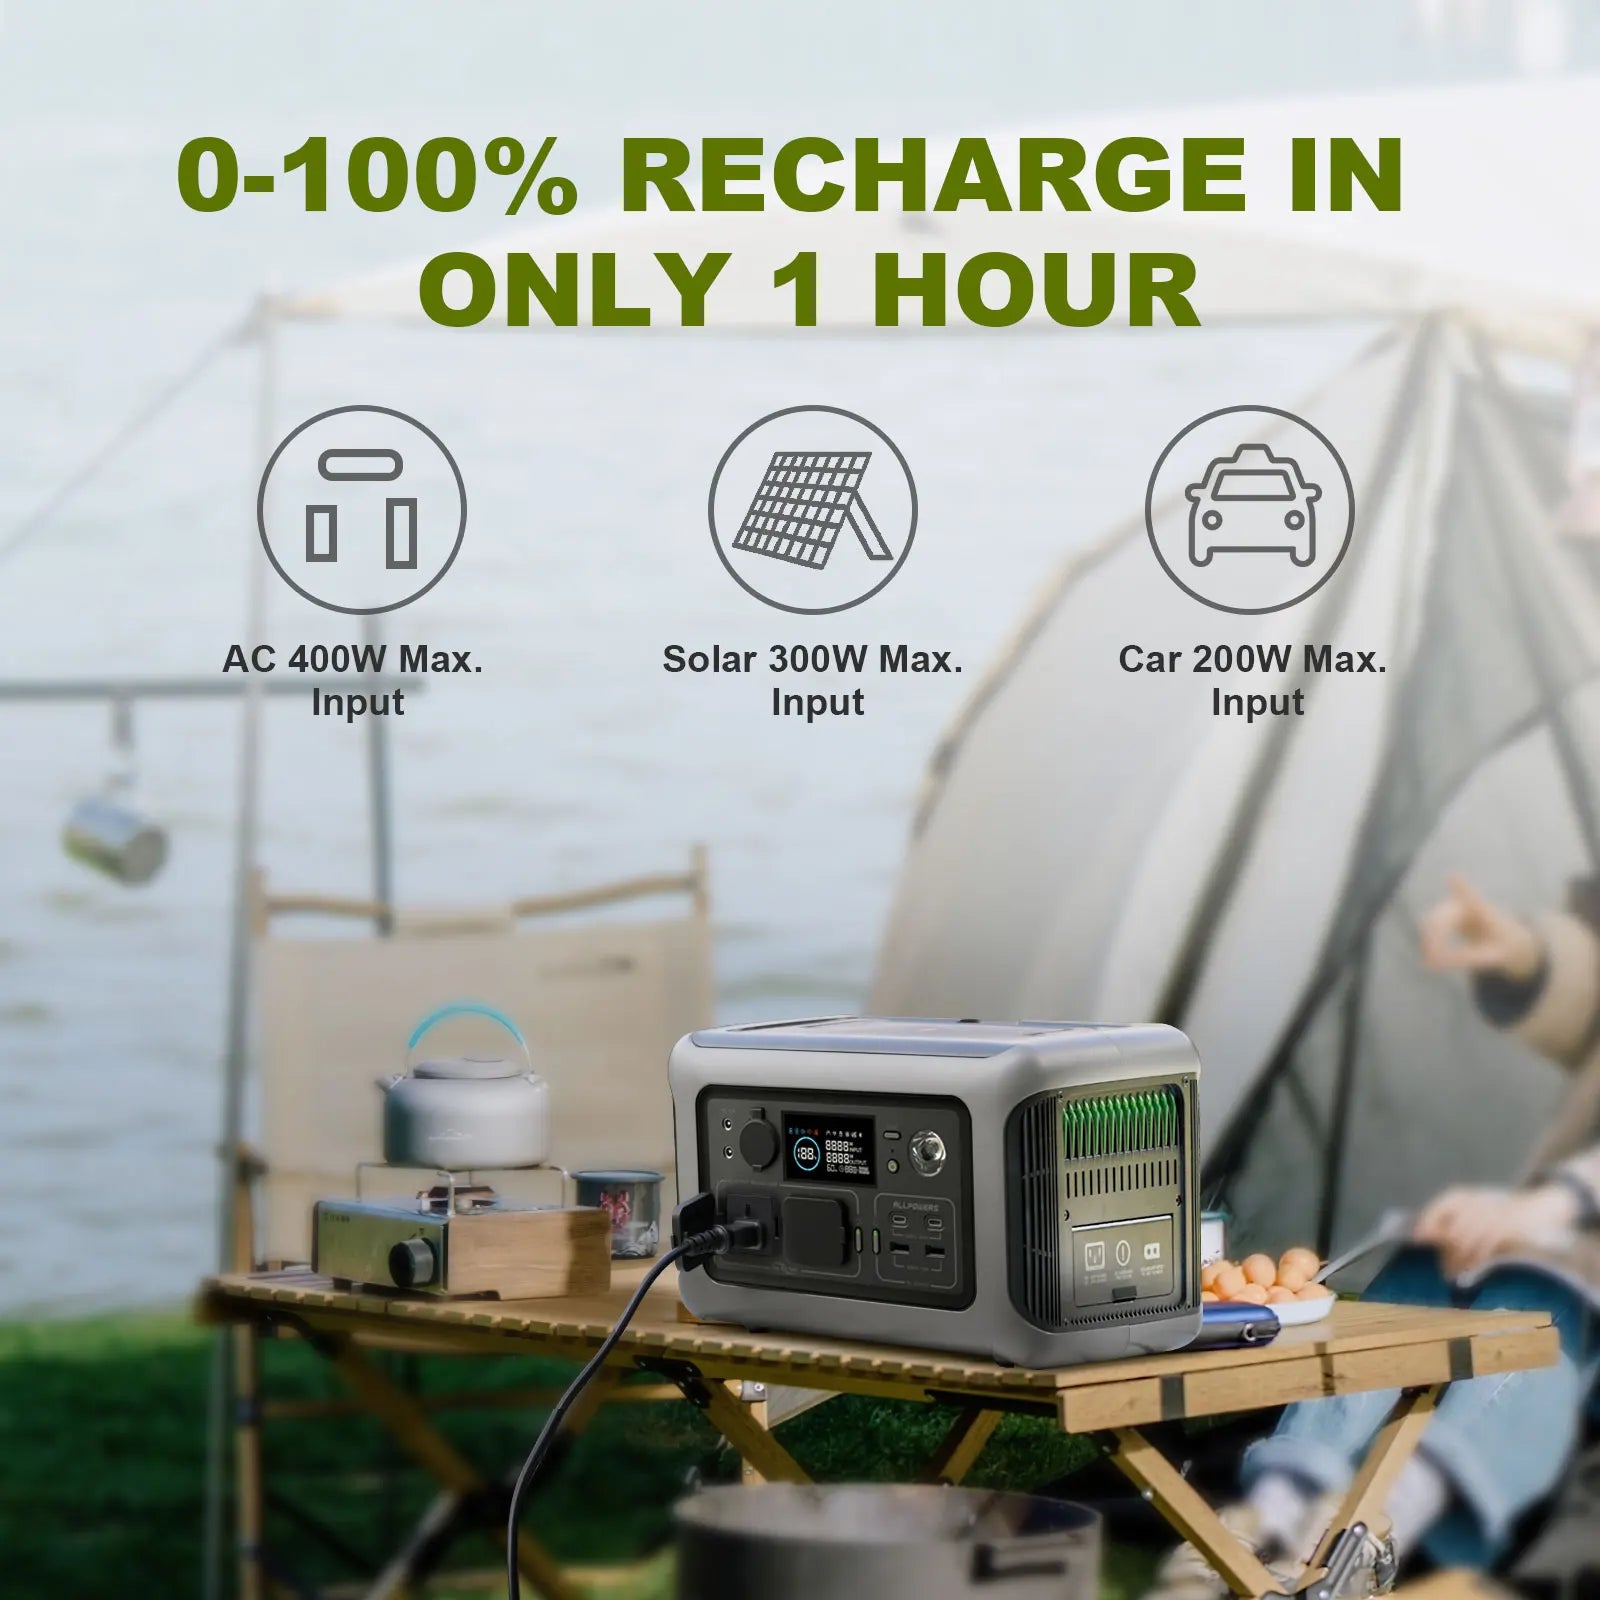 ALLPOWERS Portable Power Station R600, 299Wh LiFeP04 Battery with 2x 600W (1200W Surge) AC Outlets for Outdoor Camping RV Home - IHavePaws